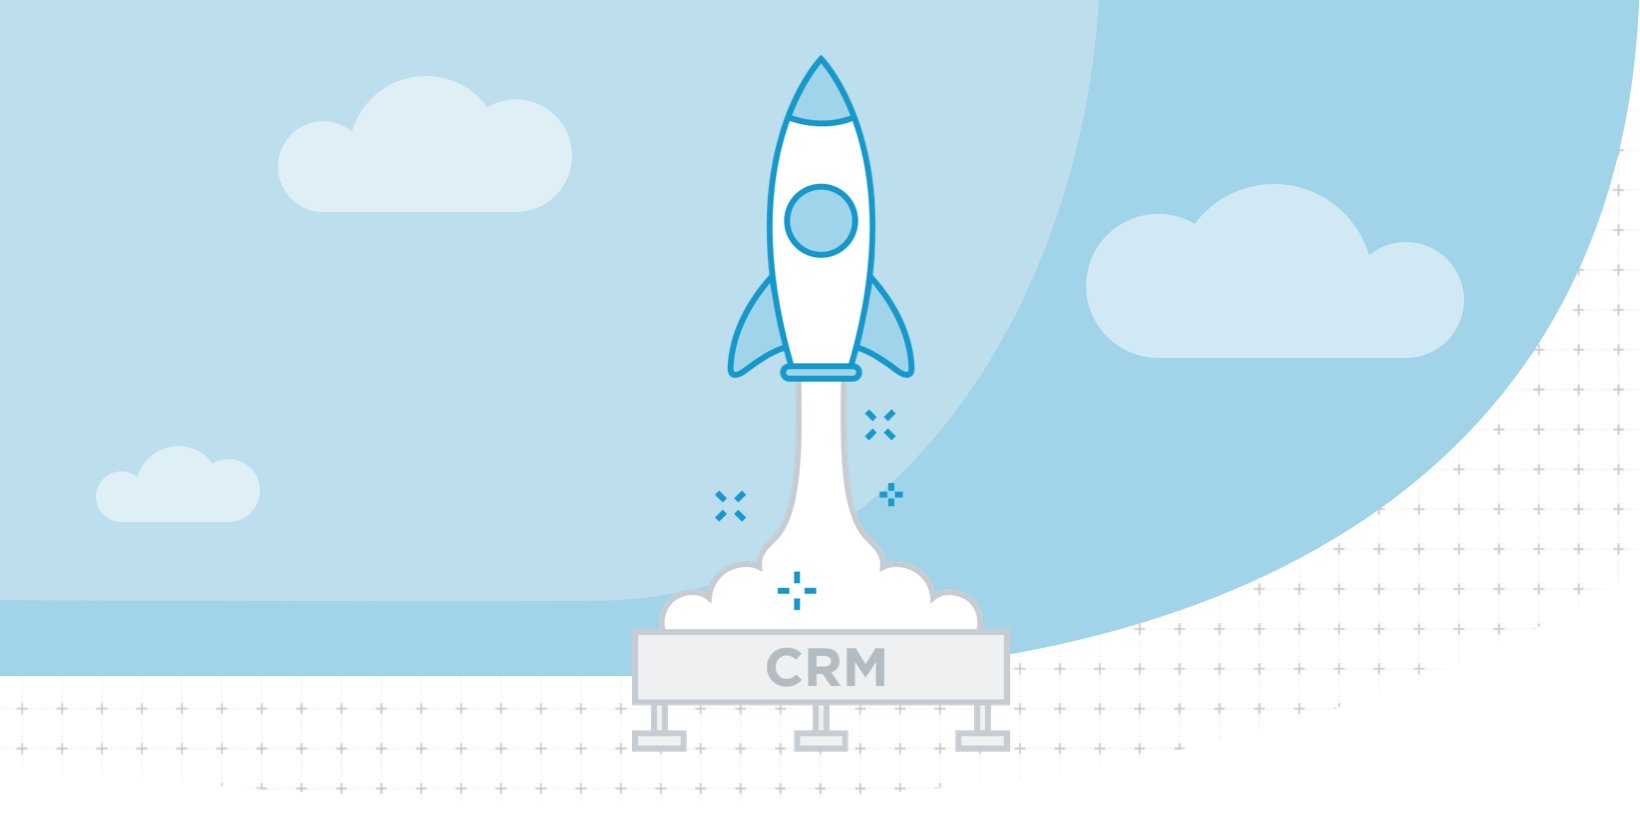 Graphic illustration of a rocket ship labelled CRM taking off